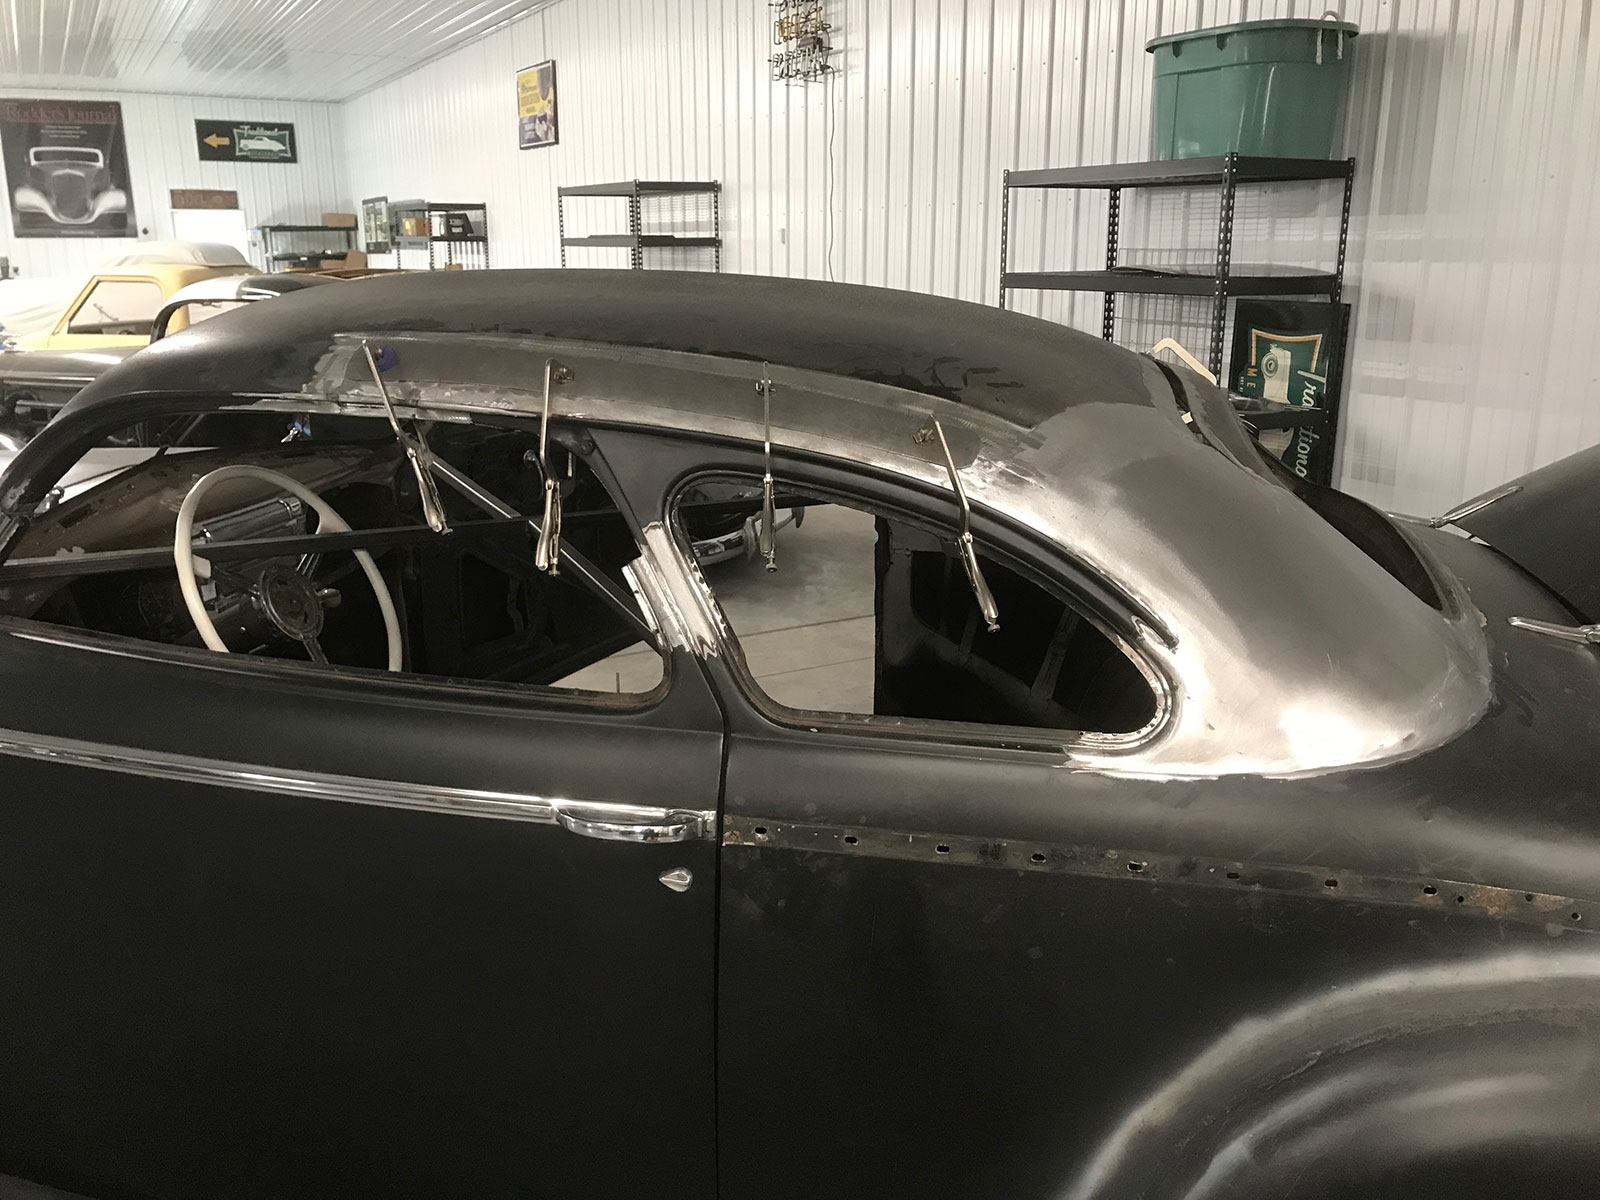 21 Forming new sheet metal to fill small gaps above backlite and side windows